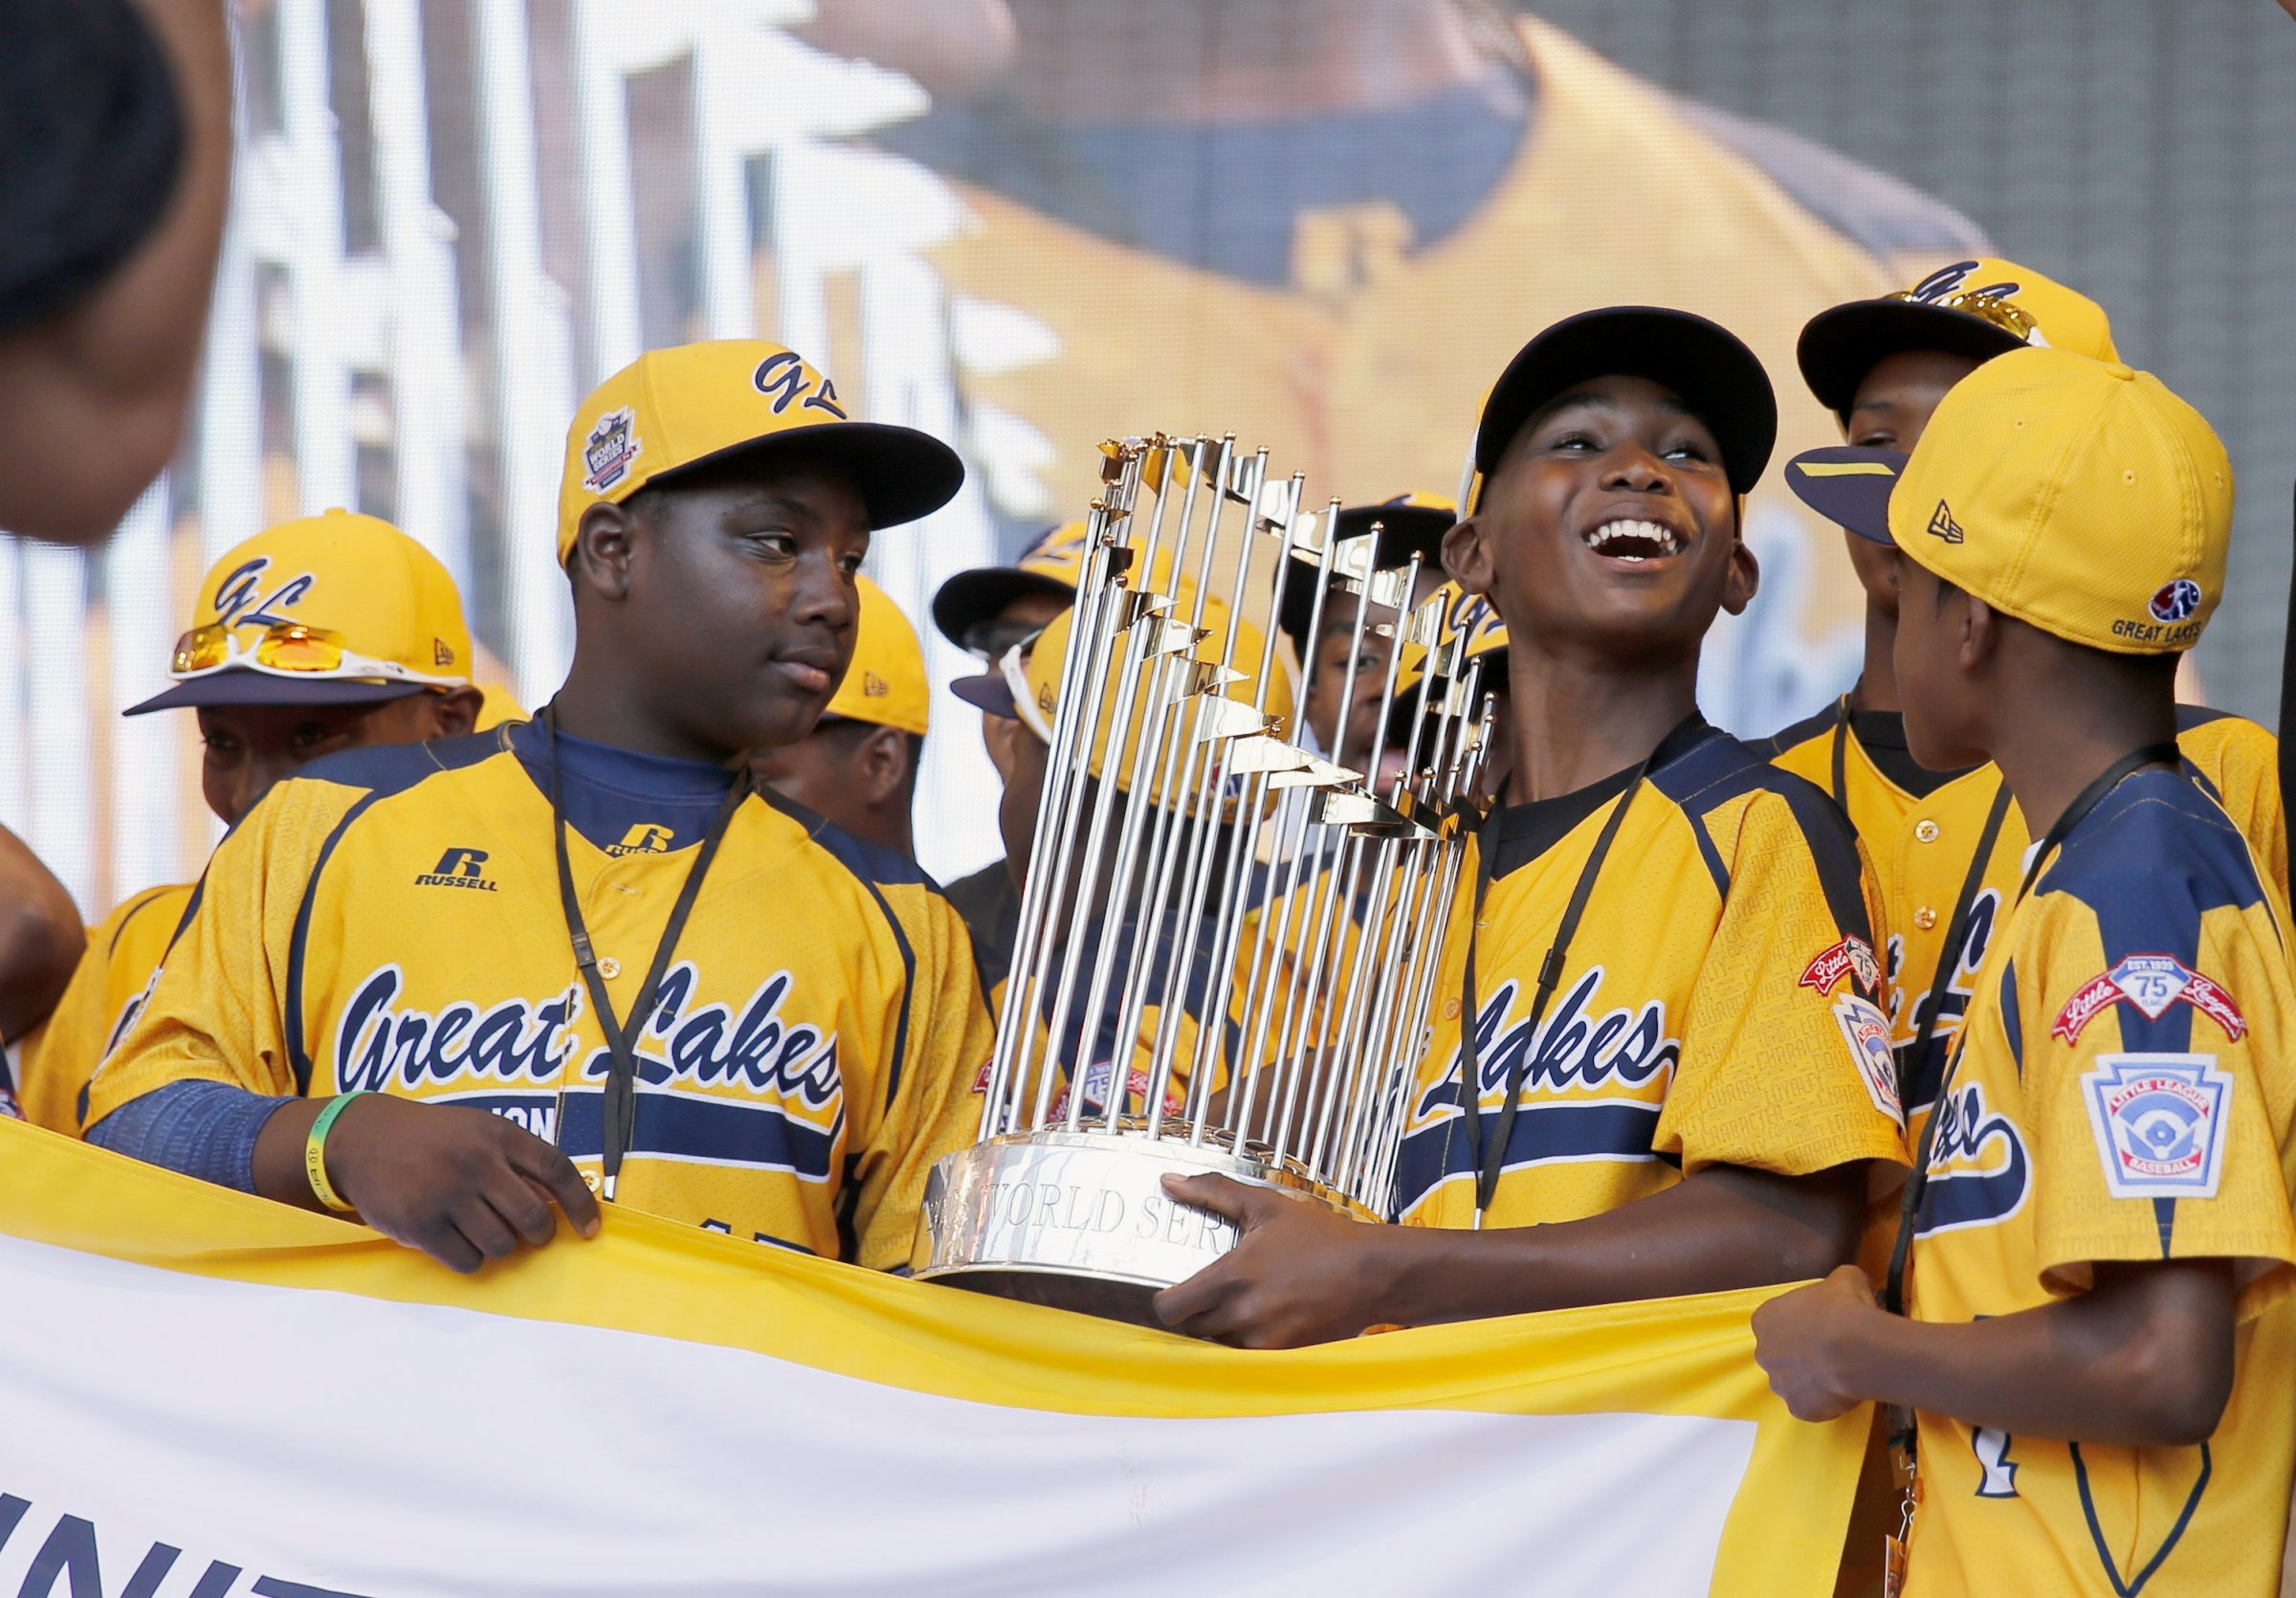 Members of the Jackie Robinson West Little League baseball team participate in a rally in Chicago celebrating the team's U.S. Little League Championship. on Aug. 27, 2014.